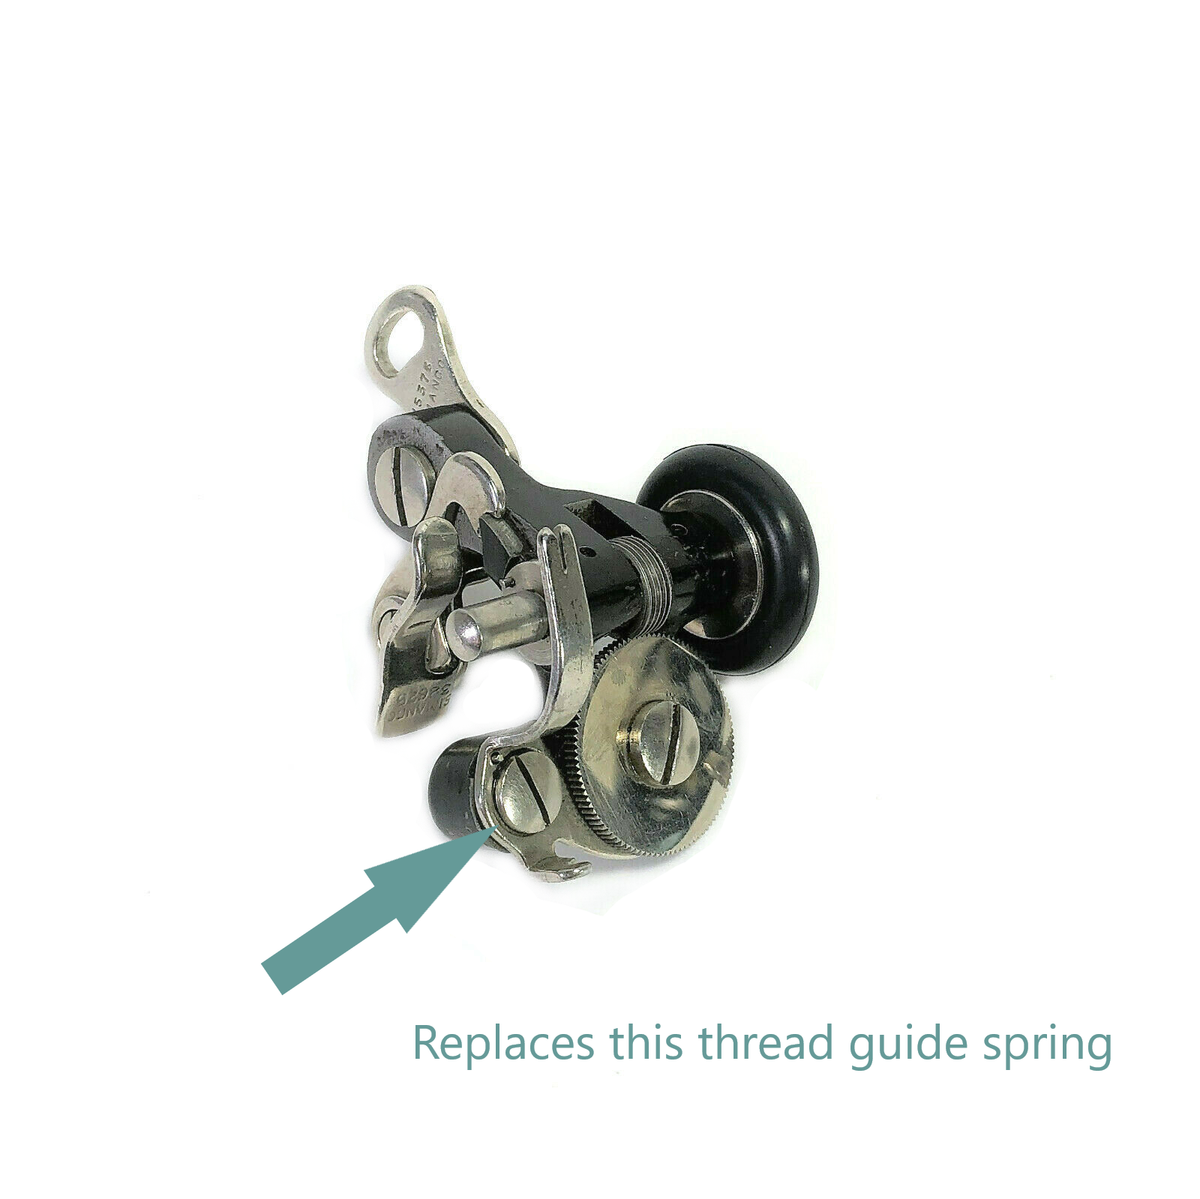 How to thread Bobbin on Singer Sewing Machine?